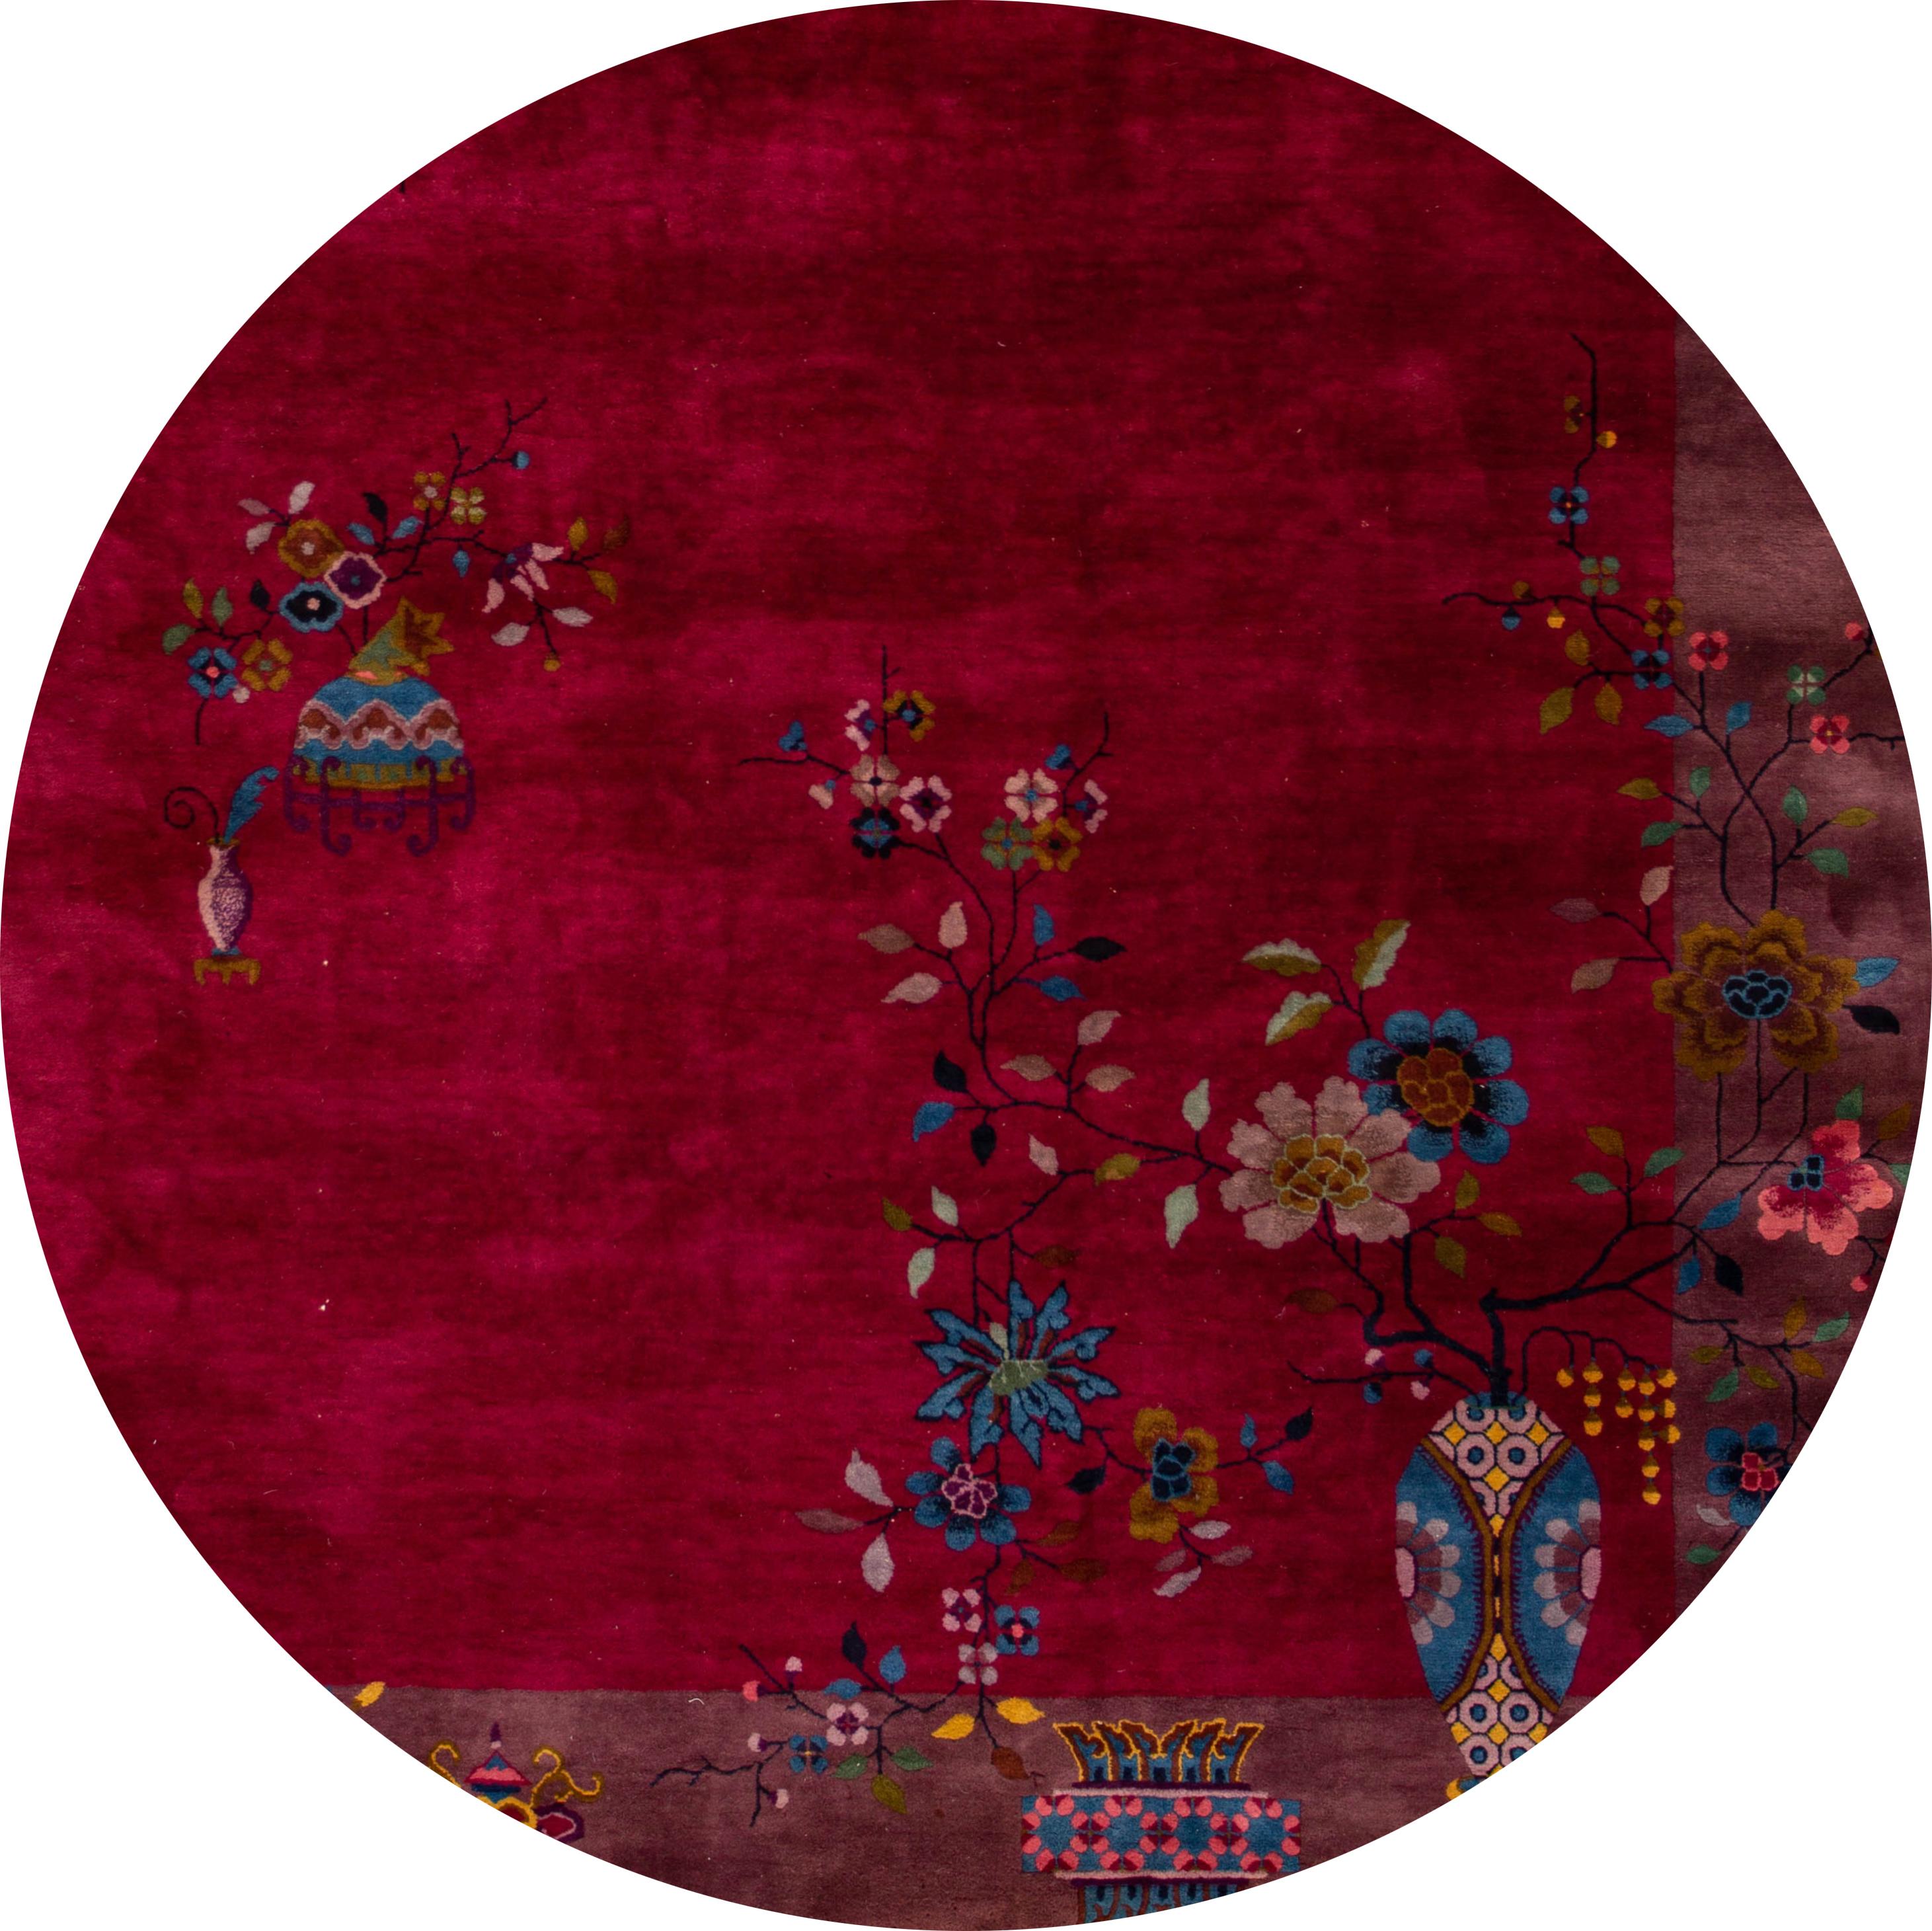 Beautiful antique Art Deco rug, hand-knotted wool with a deep burgundy field, dark lavender rame in an all-over Classic Chinese floral design, circa 1920
This rug measures 8' 10